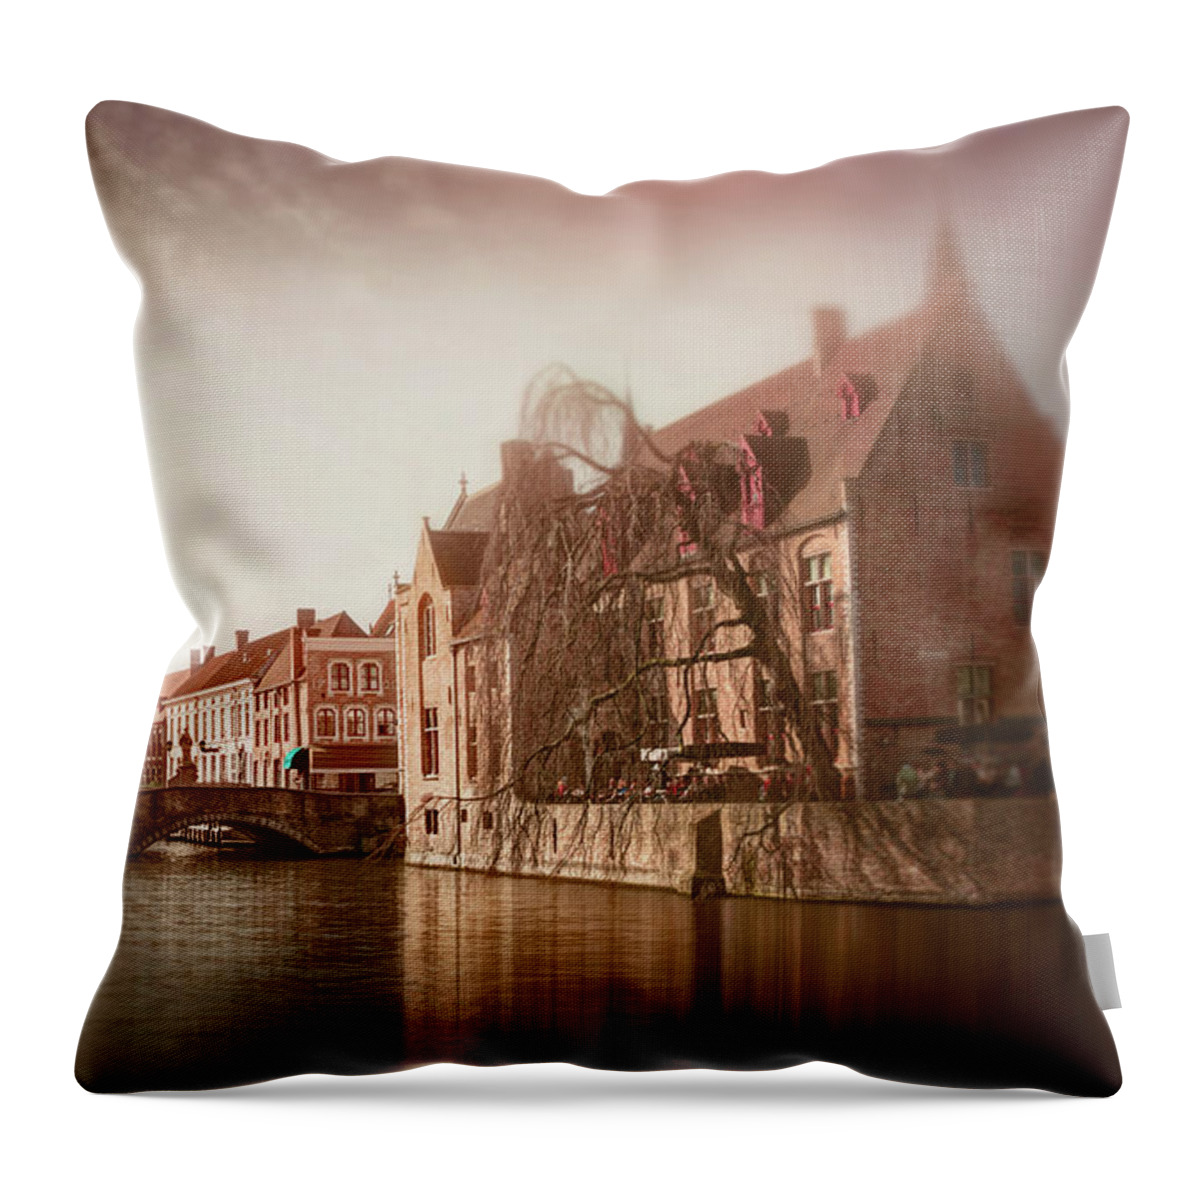 Bruges Throw Pillow featuring the photograph Vintage Bruges Belgium by Carol Japp